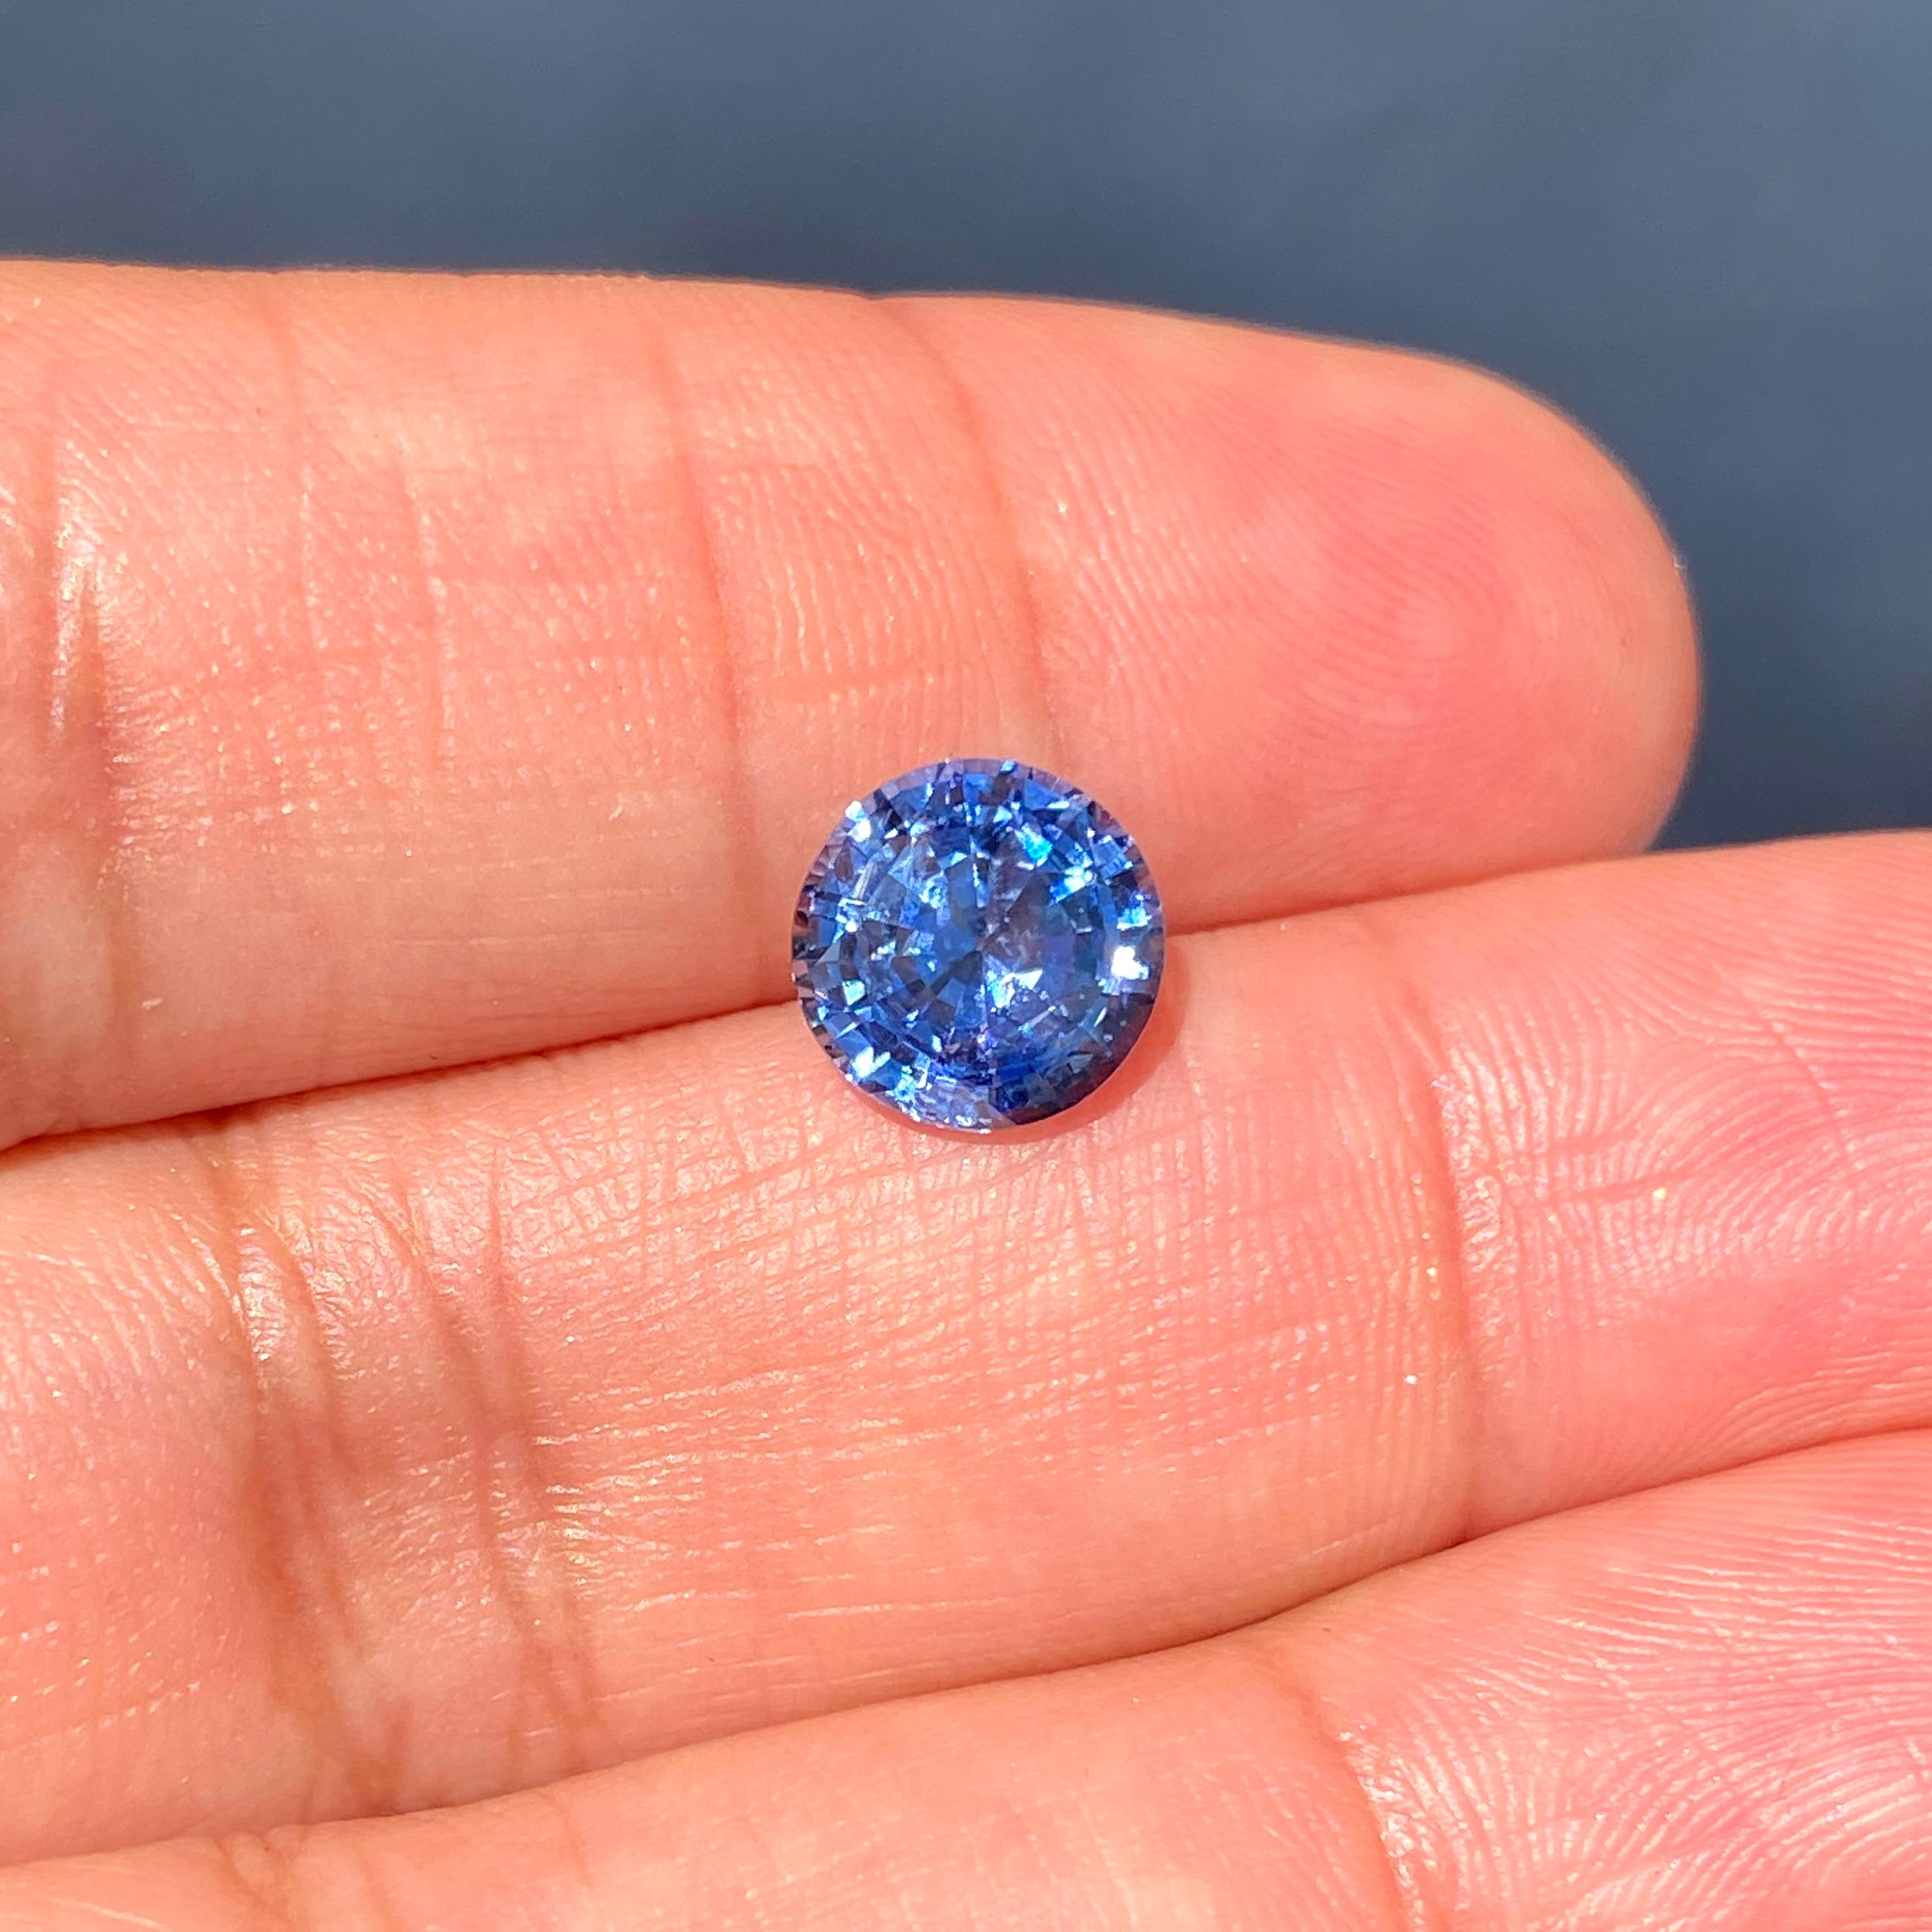 Perfect for that alternative solitaire engagement ring with lots of credentials. A large 2 carat round brilliant cut bewitching medium cornflower blue coloured sapphire from Ceylon with no indication of heat treatment.

This medium cornflower blue